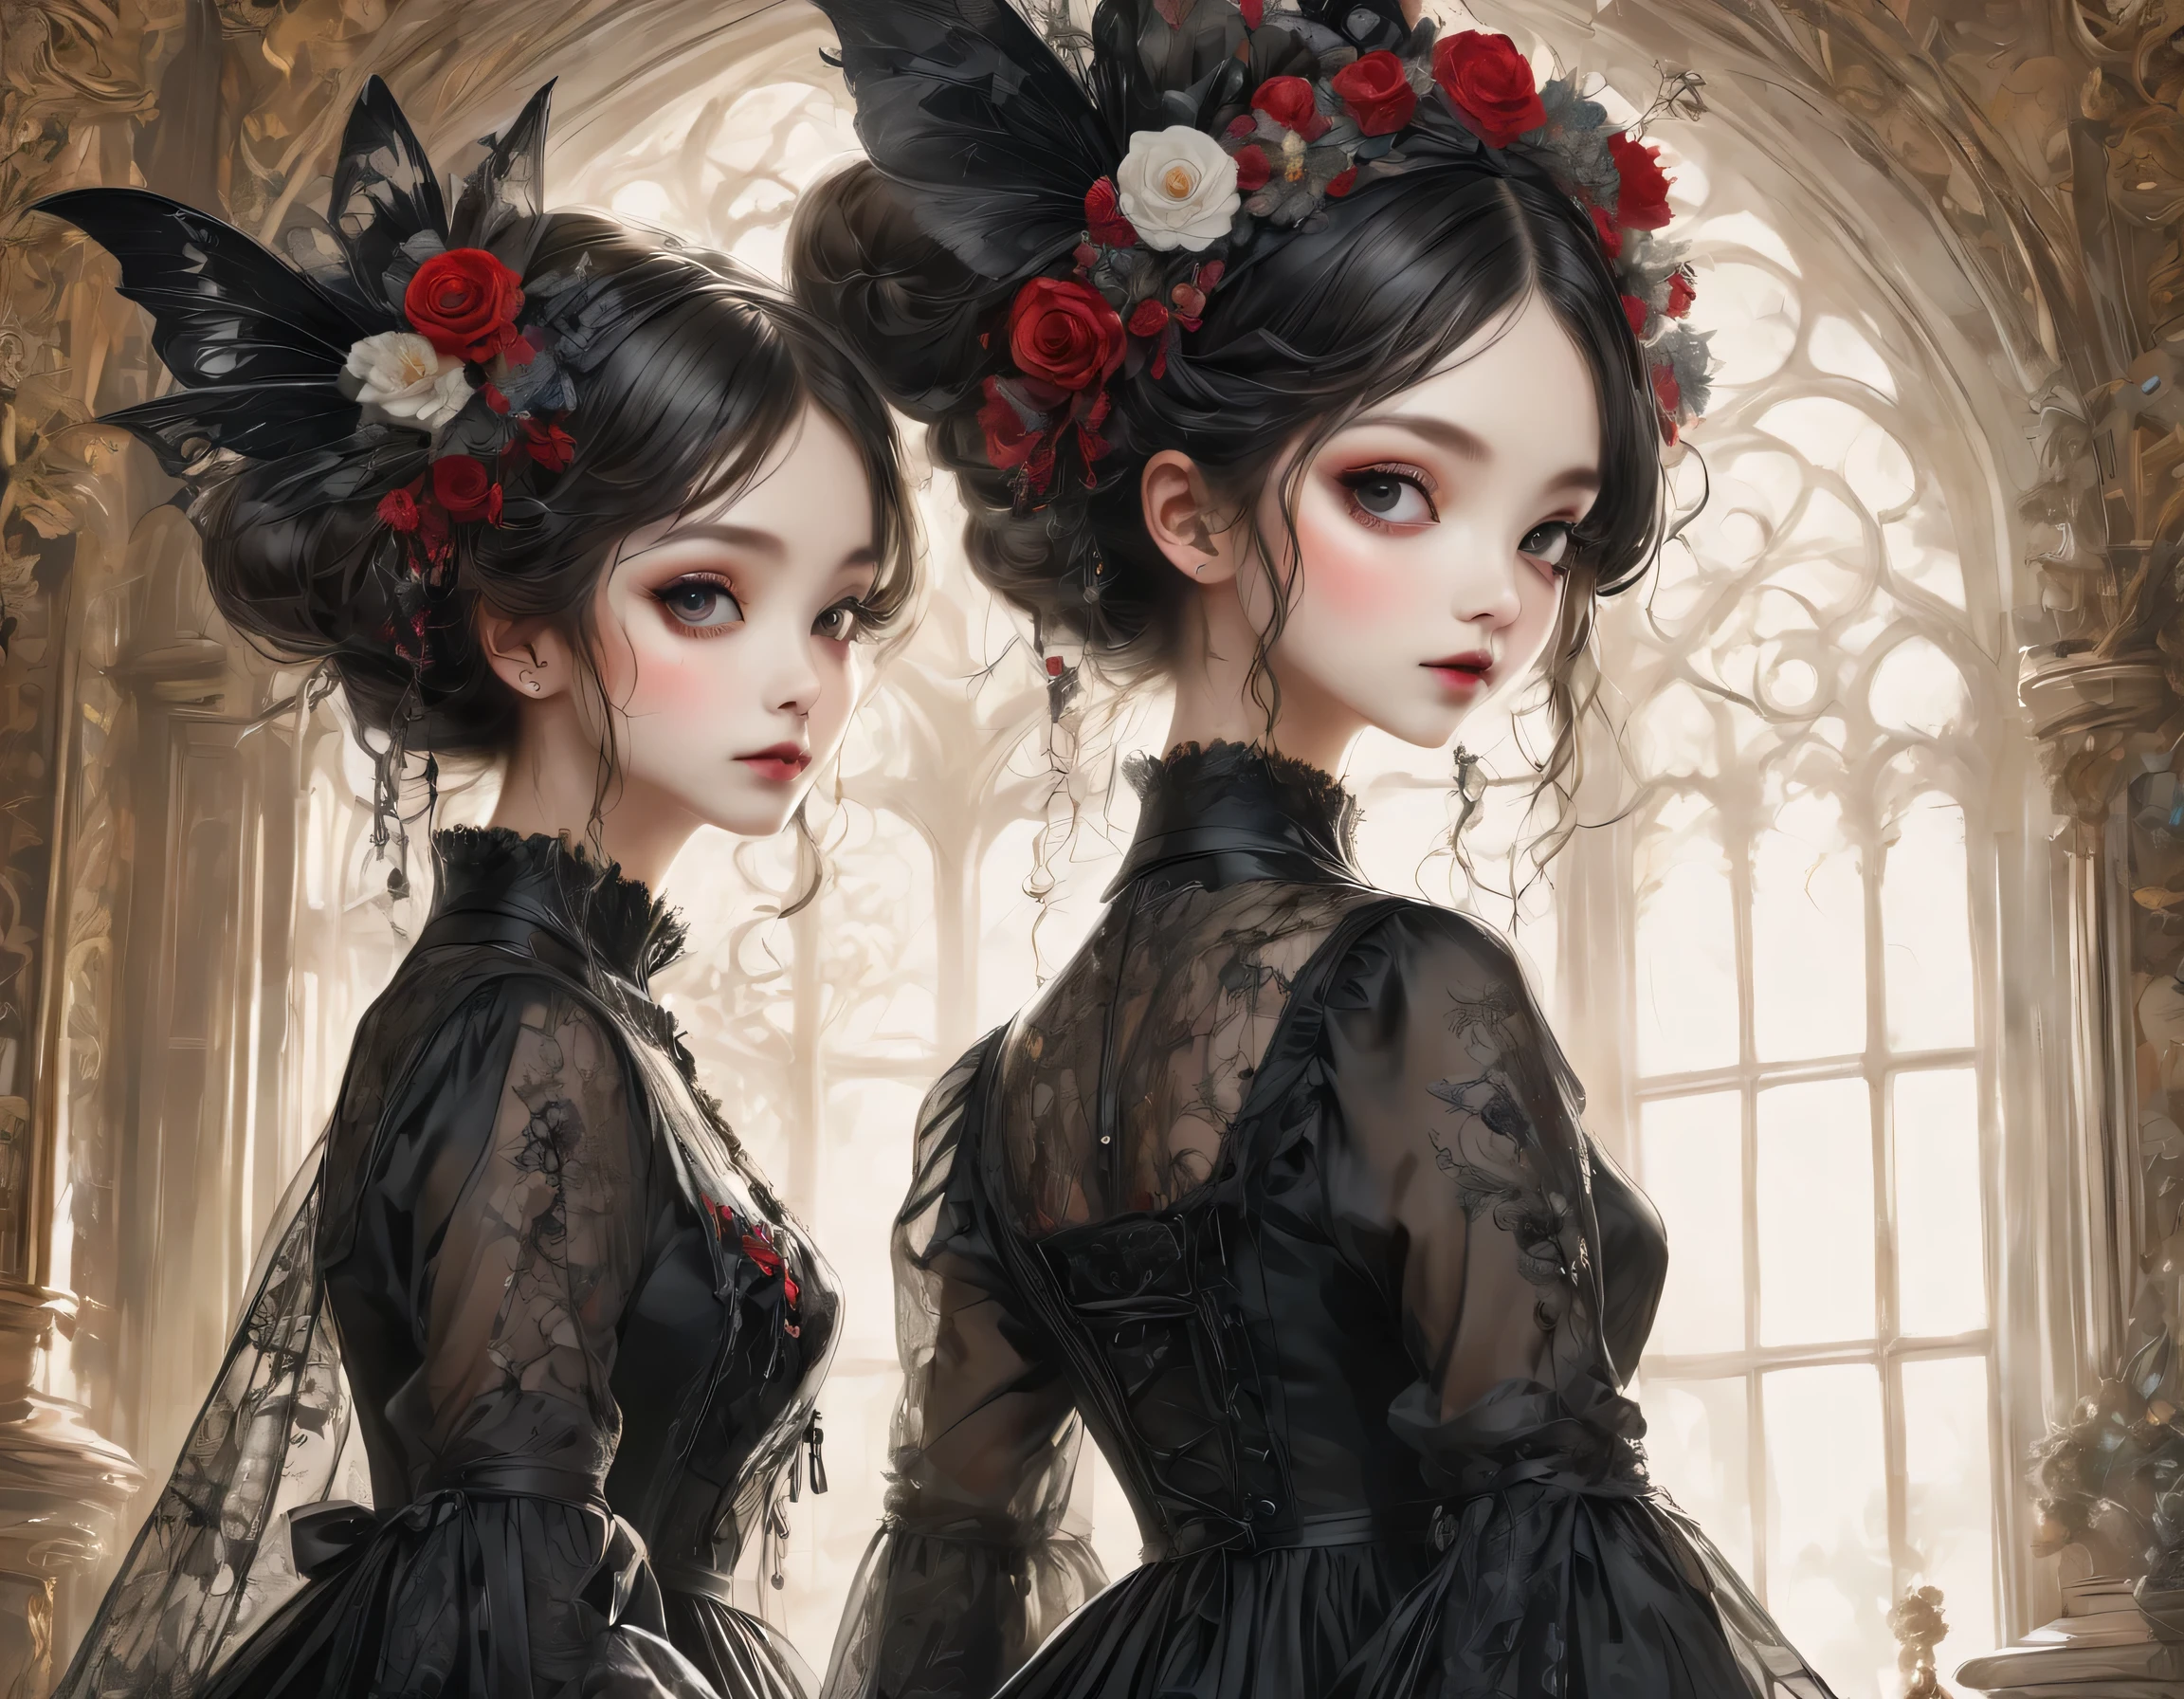 Gothic horror paintings,((Two beautiful girls standing:Symmetric:Gothic Lolita:12 years old:Ephemeral:((Two beautiful girls)):cute:Adorable:Perfect Face:White:eyelash:Big eyes,Smooth Skin)),Gothic House,Looking Back,black and white,scary but beautiful,Gothic Beauty,Expressing beautiful madness,Shrouded in mystery,Placing dark clouds that foreshadow tragedy in a beautiful gothic house,,detailed,Use red as an accent color,Race,embroidery,Detailed pattern,rendering,Designer House,Luxury Homes,nice,quiet,Beautiful light and shadow,Gothic Room,Golden Ratio,Anatomically correct,Rococo,BREAK,(The girl on the right(Black Dress)Gothic Lolita),BREAK,(The girl on the left(White Dress)Gothic Lolita),BREAK,embroidery,Detailed pattern,rendering,Zentangle Elements,Beautiful Gothic Horror,masterpiece,The best masterpiece